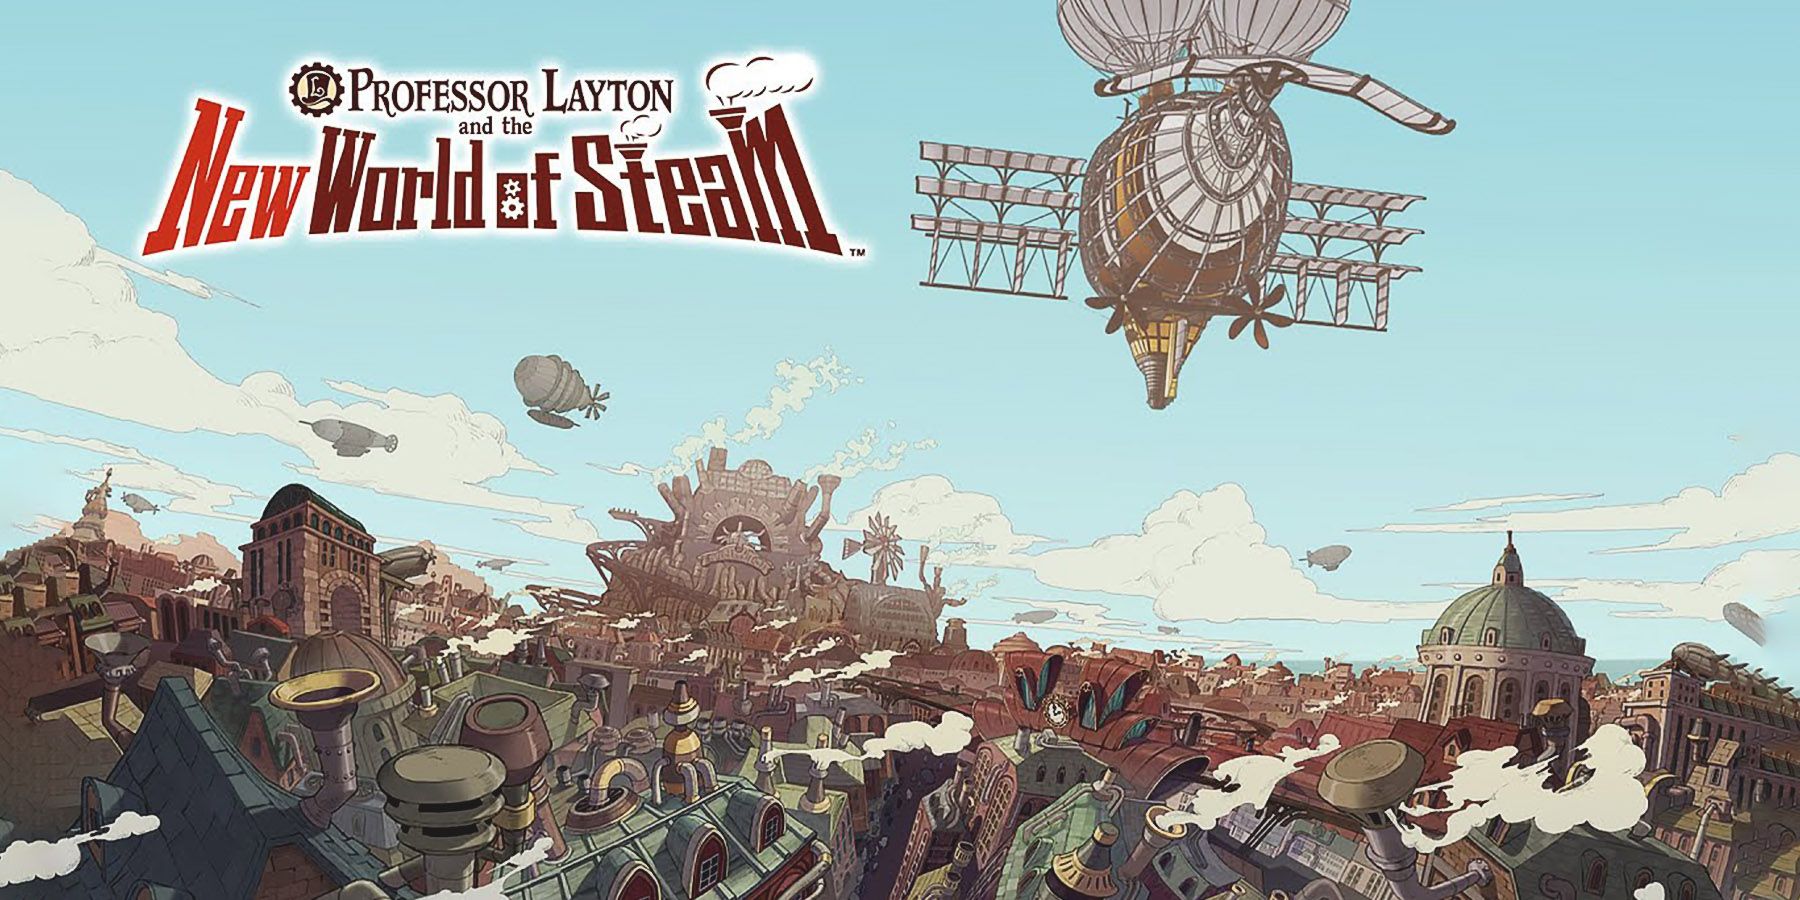 Professor Layton and the New World of Steam first teaser trailer artwork